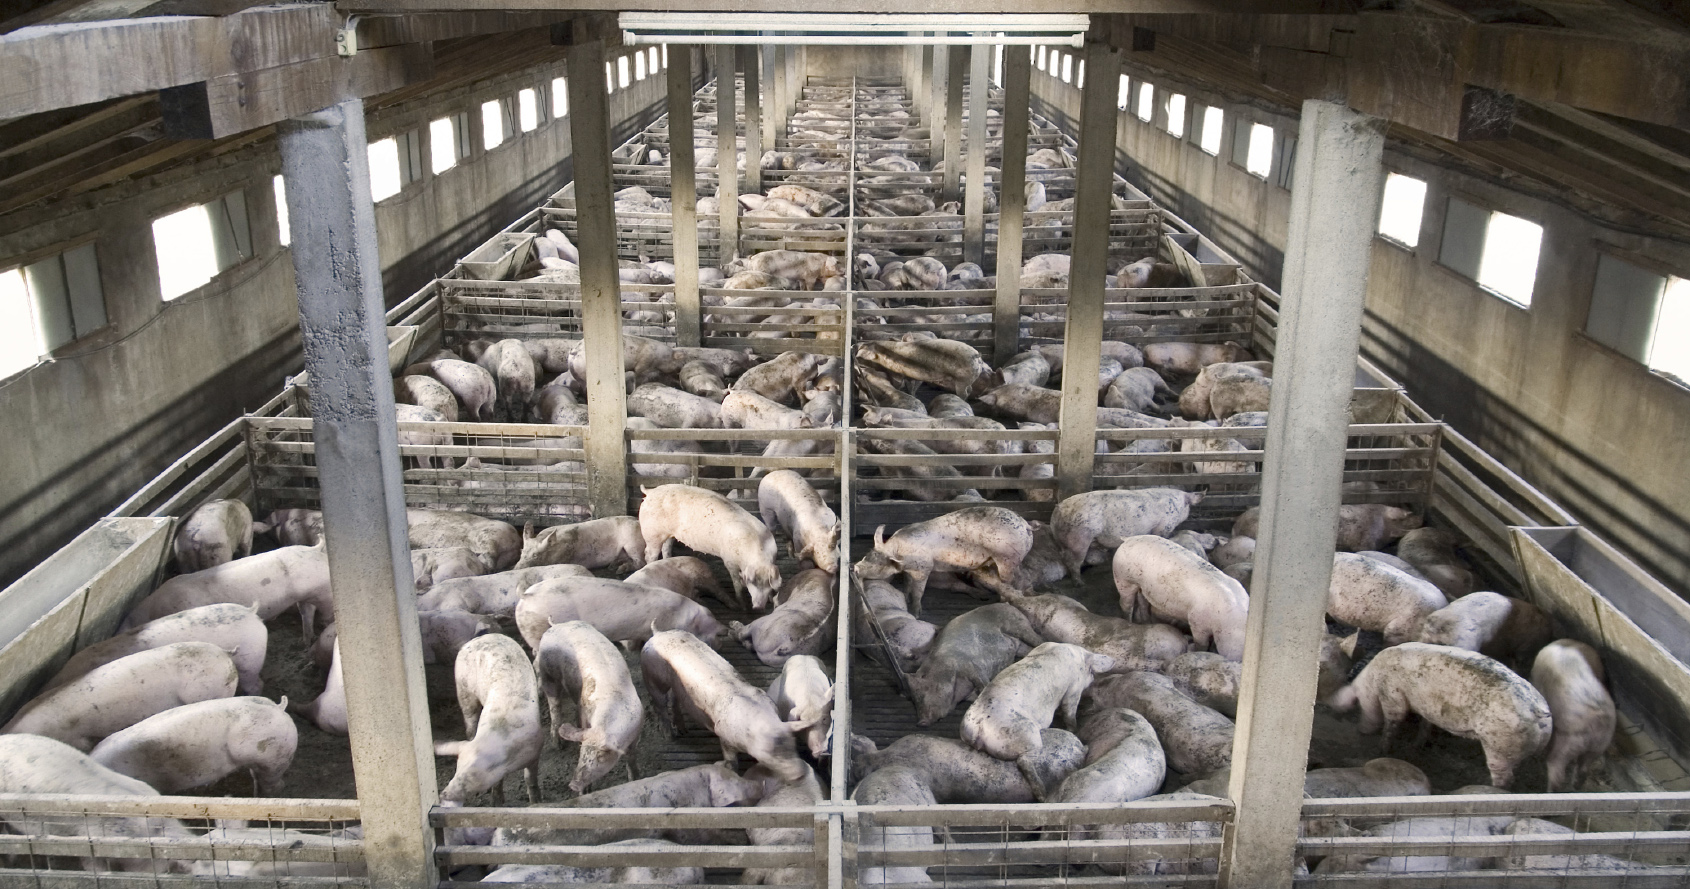 Small pig farm from above - Associated Press